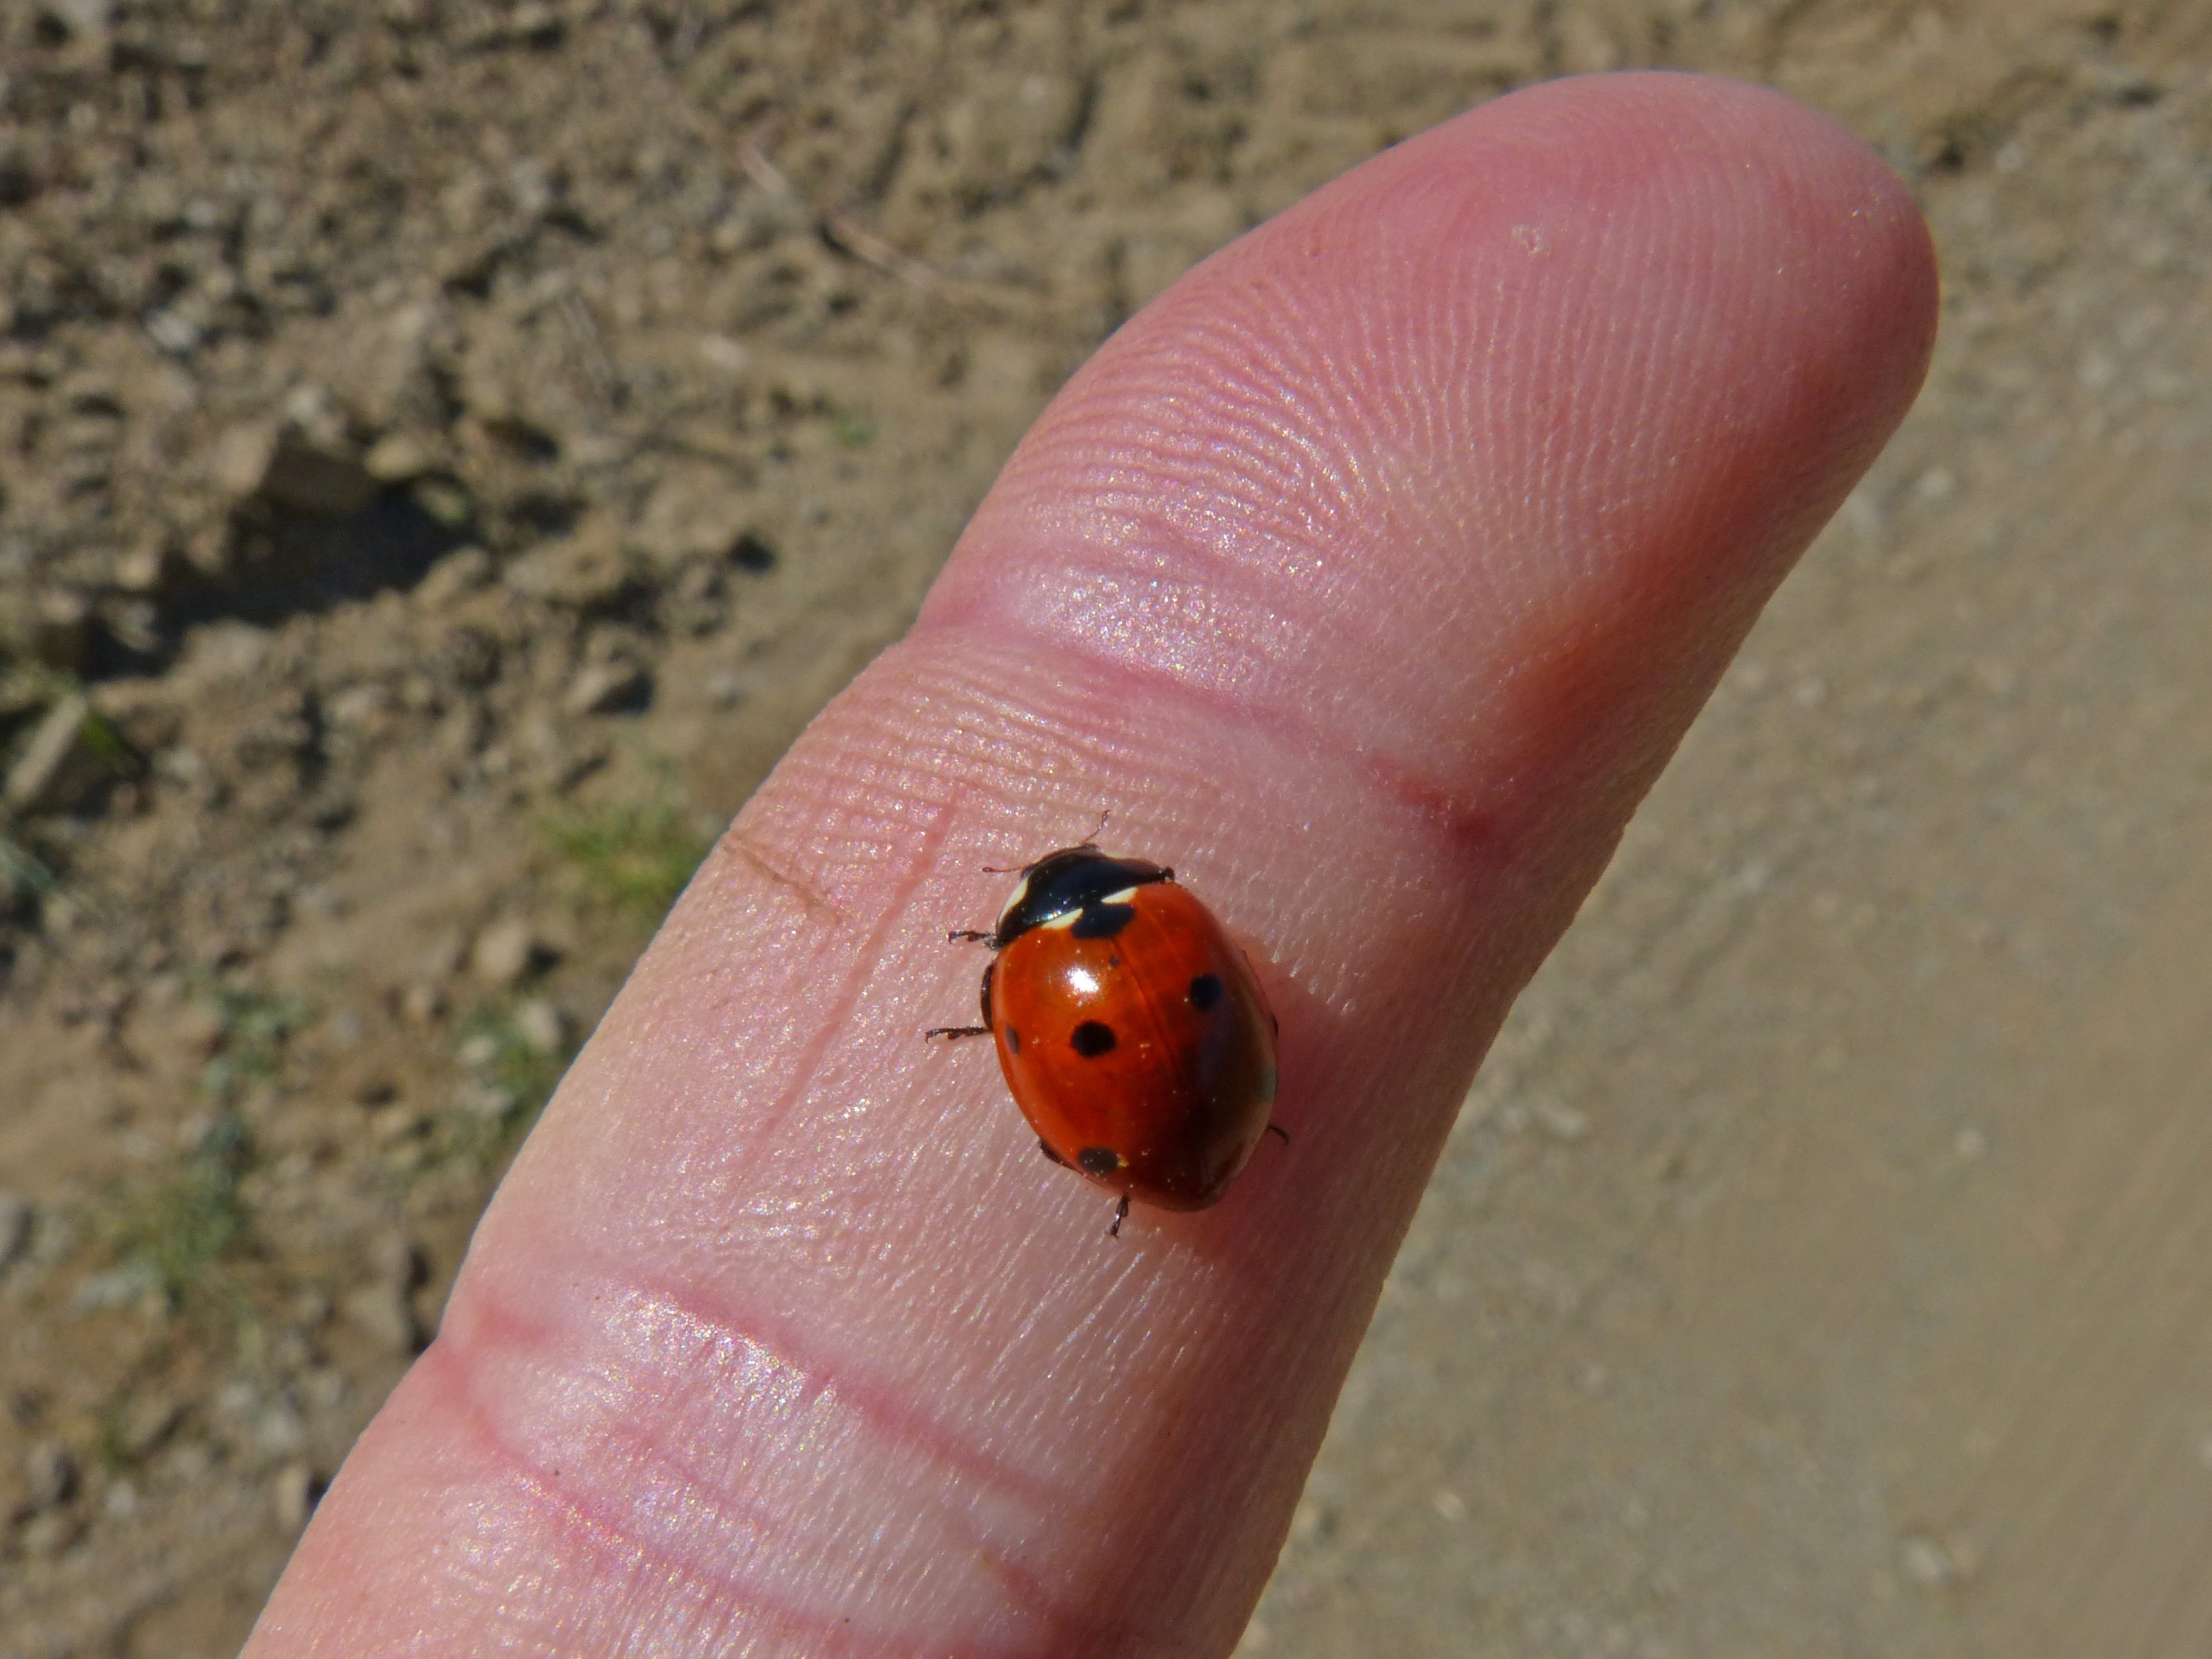 Finger, Tiny, Ladybug, Small, Insect, human body part, human hand